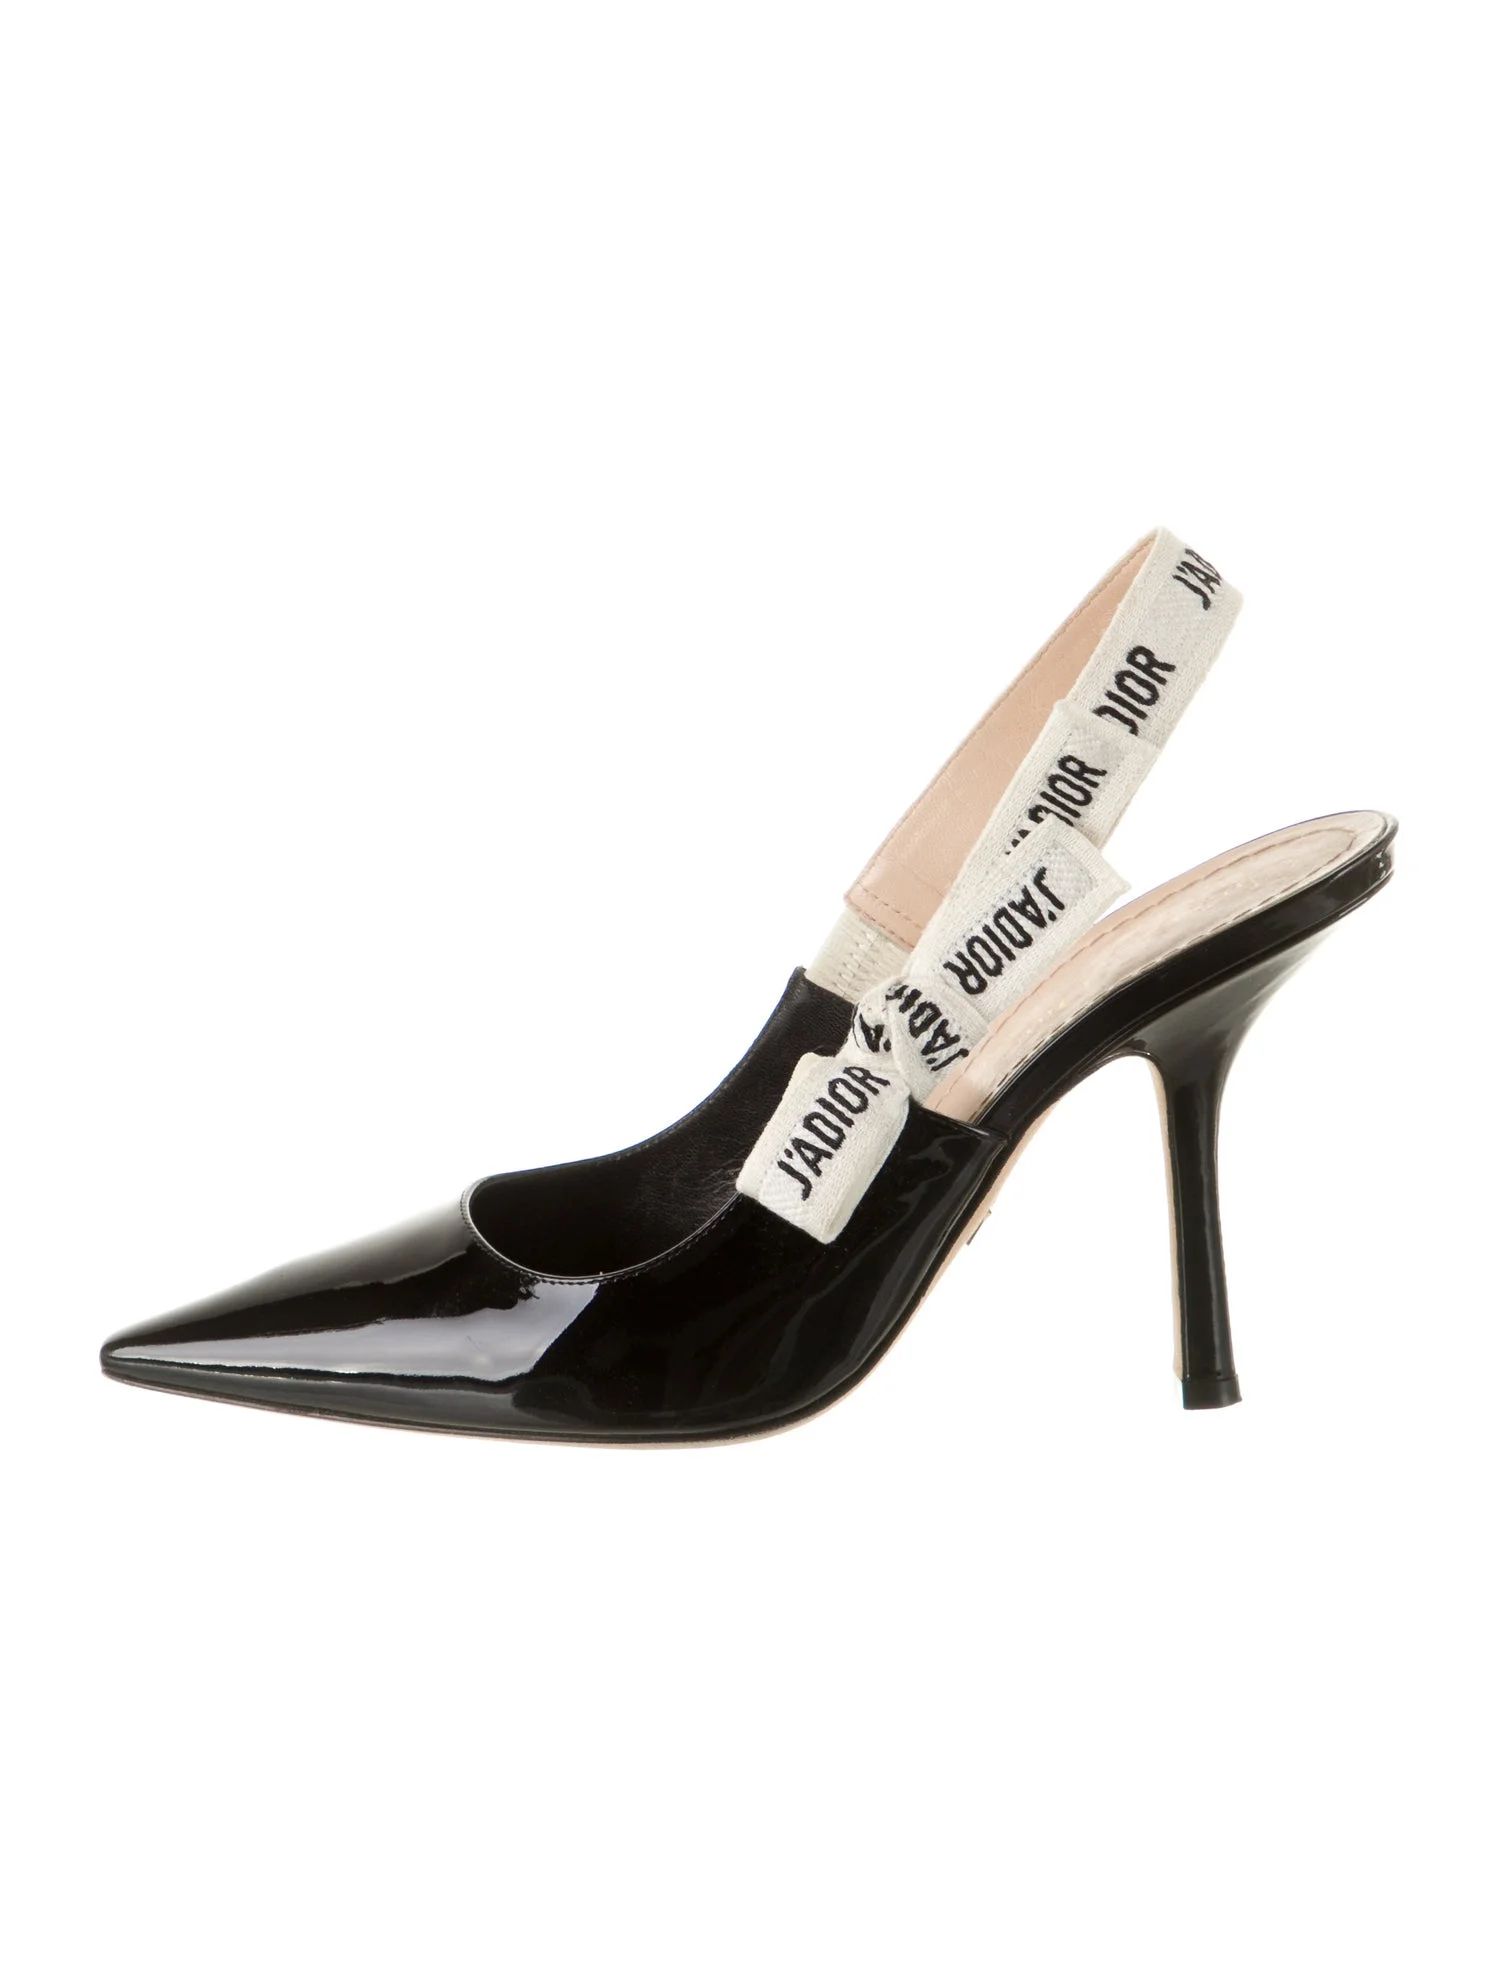 J'Adior Patent Leather Slingback Pumps | The RealReal